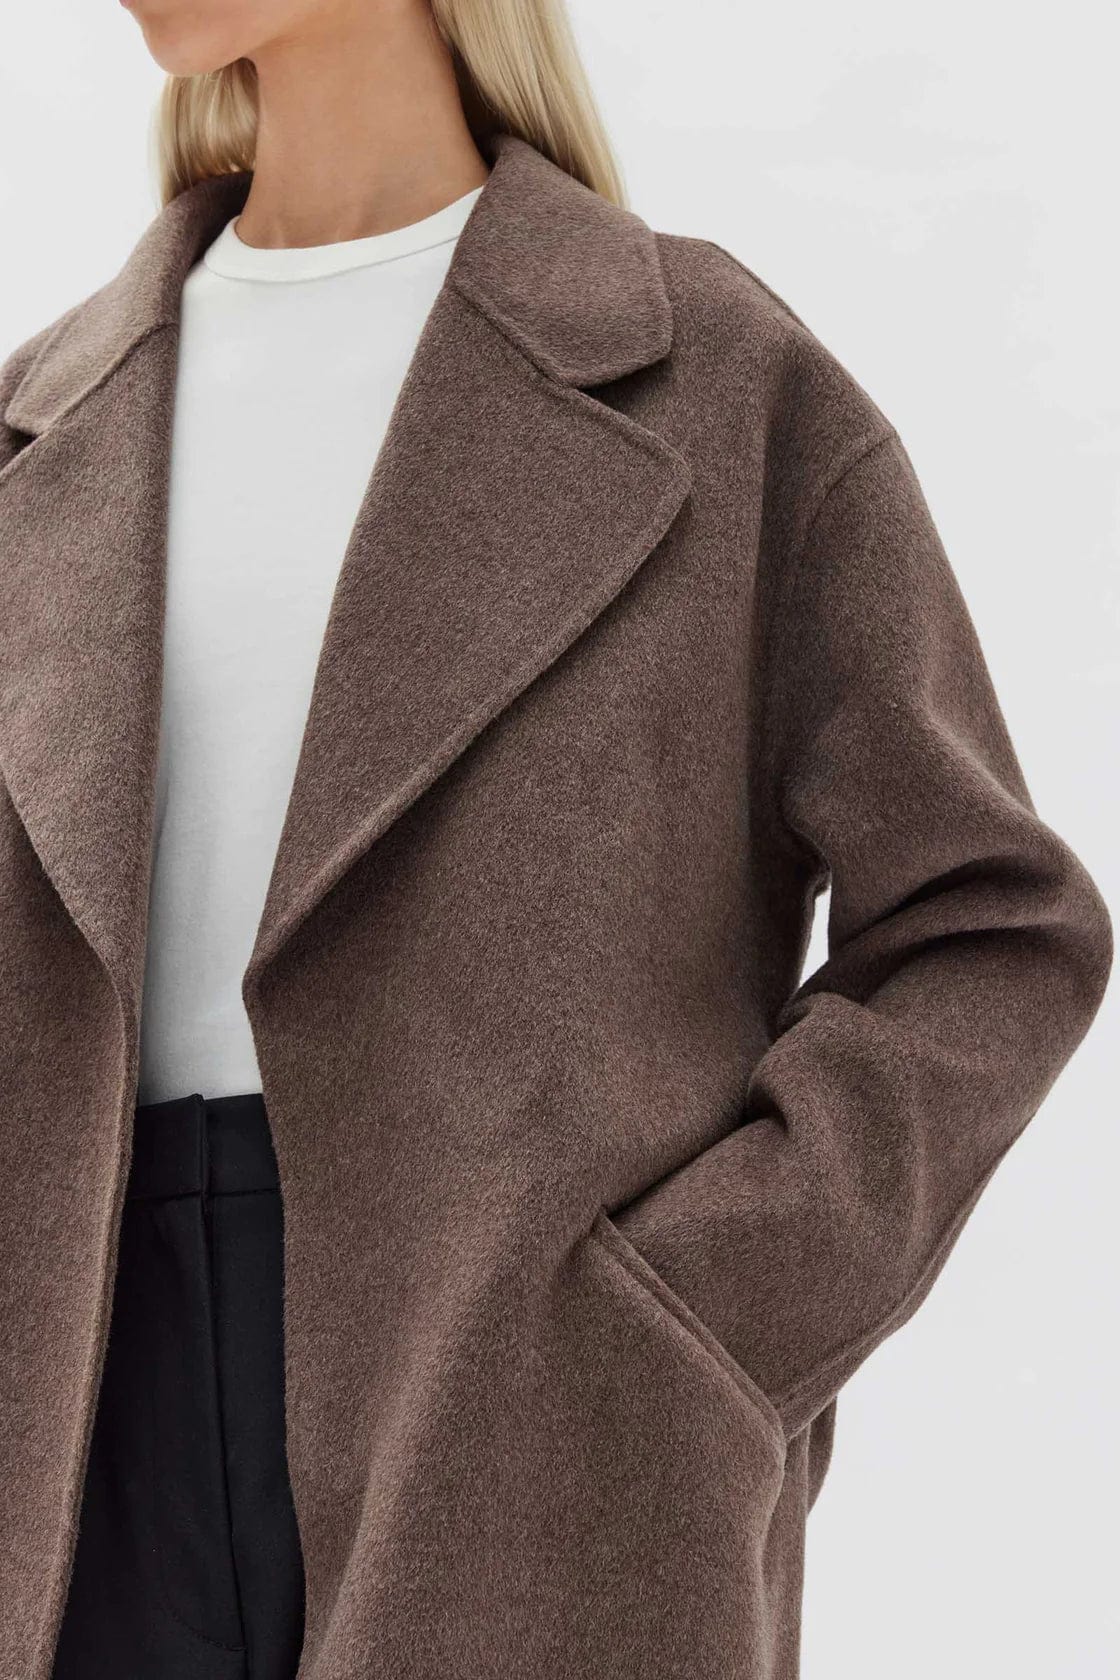 Assembly Label Coats - Wool Assembly Label | Sadie Single Breasted Wool Coat - Cocoa Marle